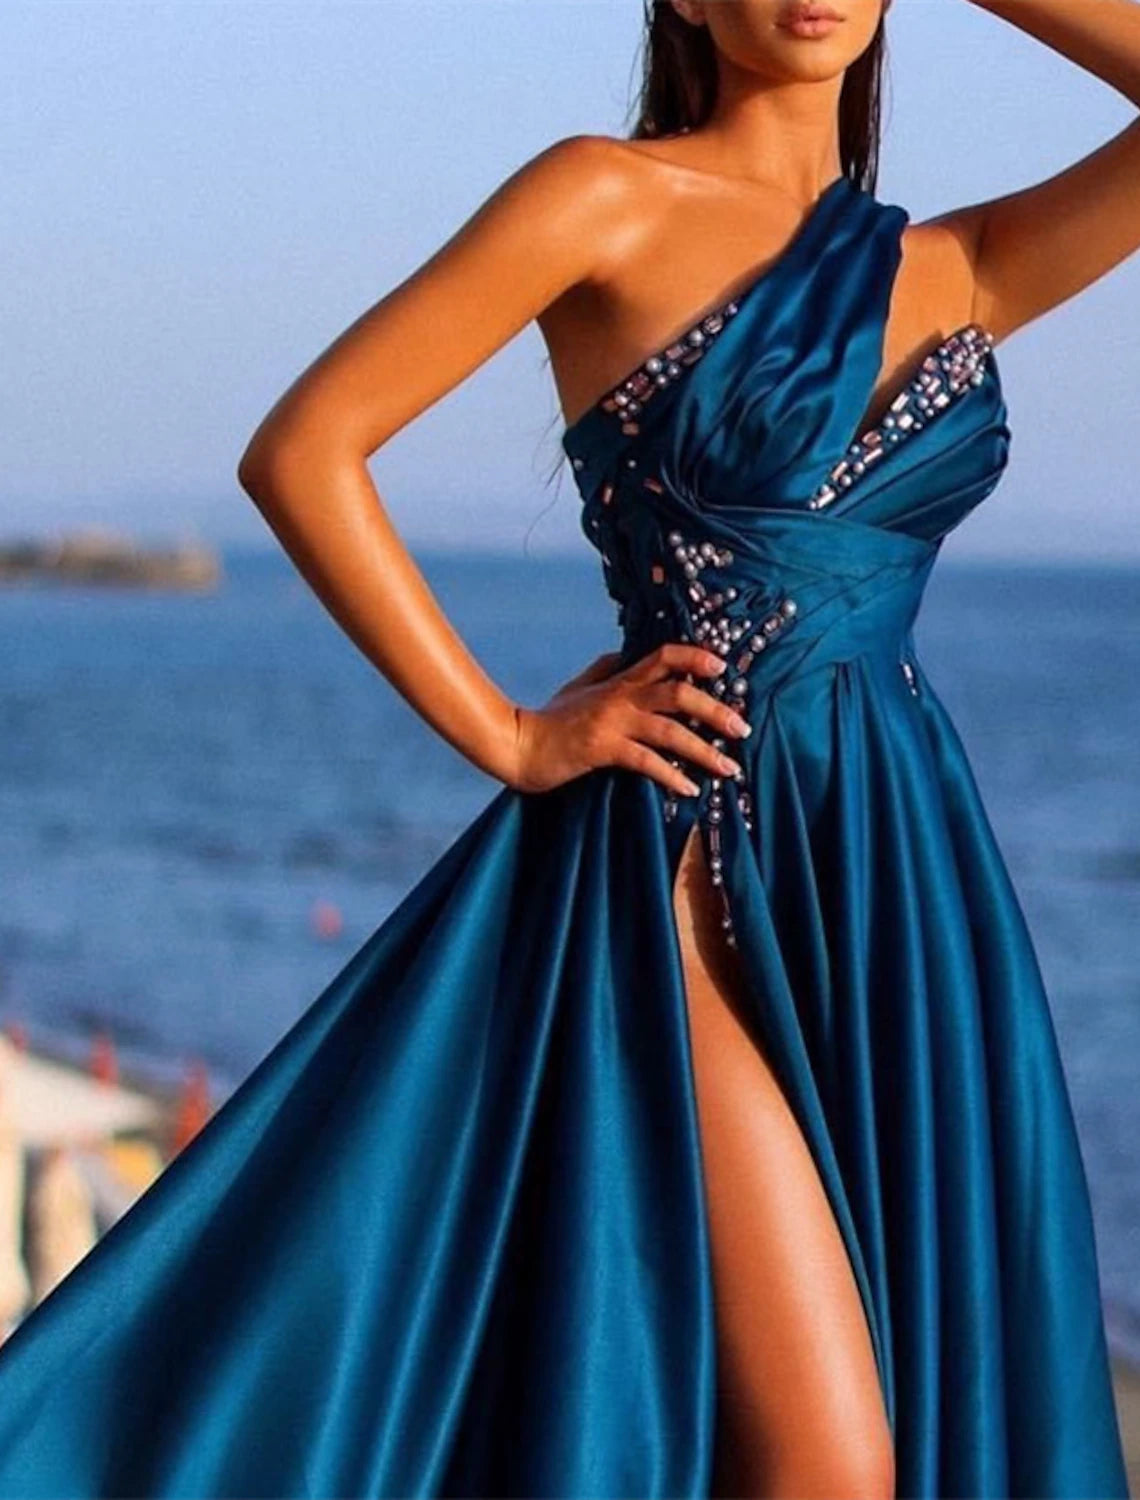 A-Line Evening Gown Sexy Dress Formal Wedding Guest Court Train Sleeveless One Shoulder Charmeuse with Rhinestone Slit